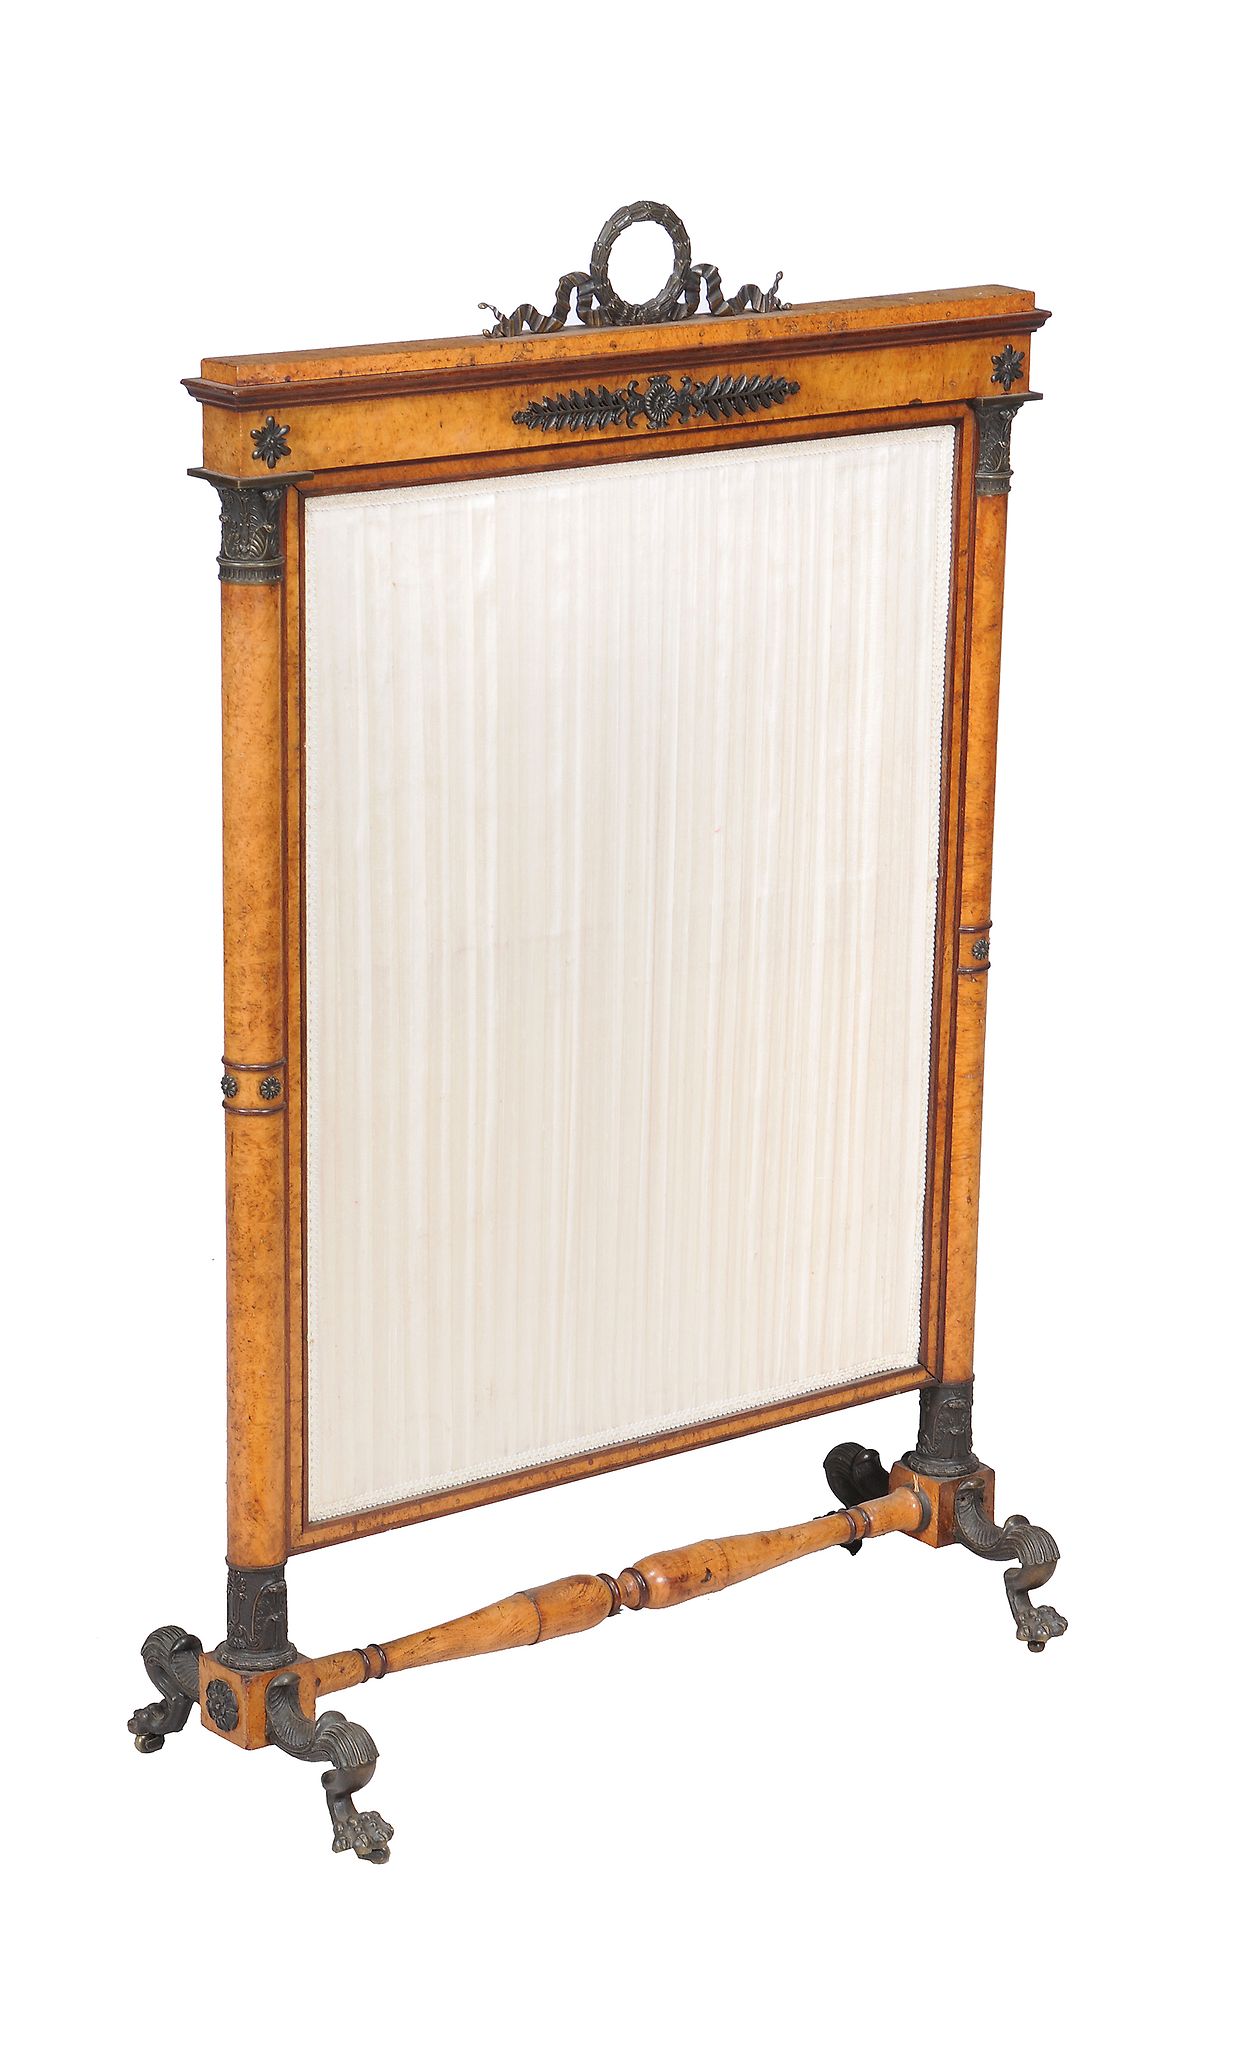 A Regency karelian birch and bronze mounted fire screen, circa 1815, the pleated screen flanked by